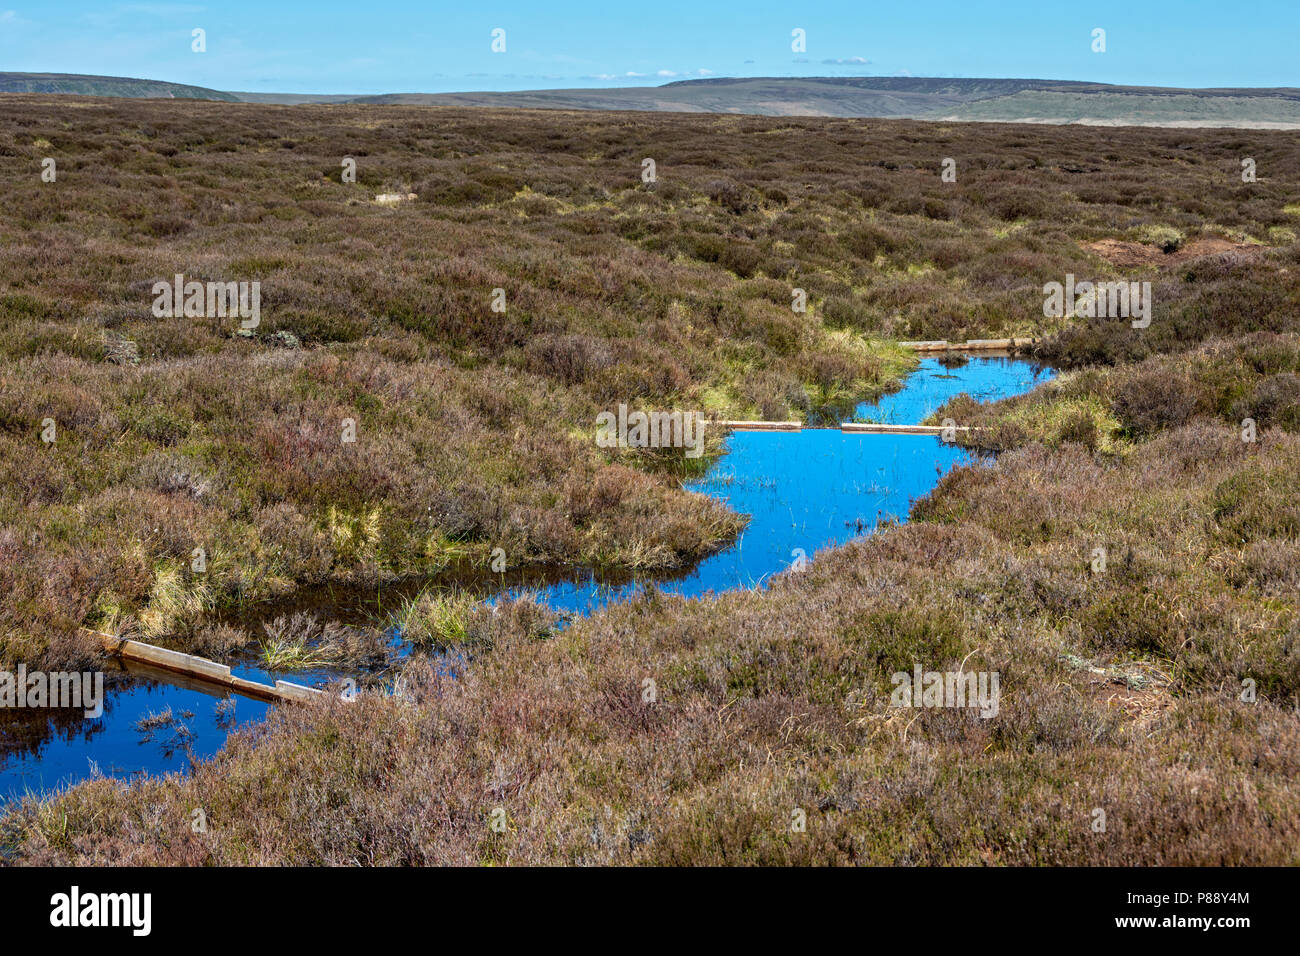 Small dams built to reduce peat erosion and increase water retention, on the Bleaklow plateau, near Glossop, Peak District, Derbyshire, England, UK. Stock Photo